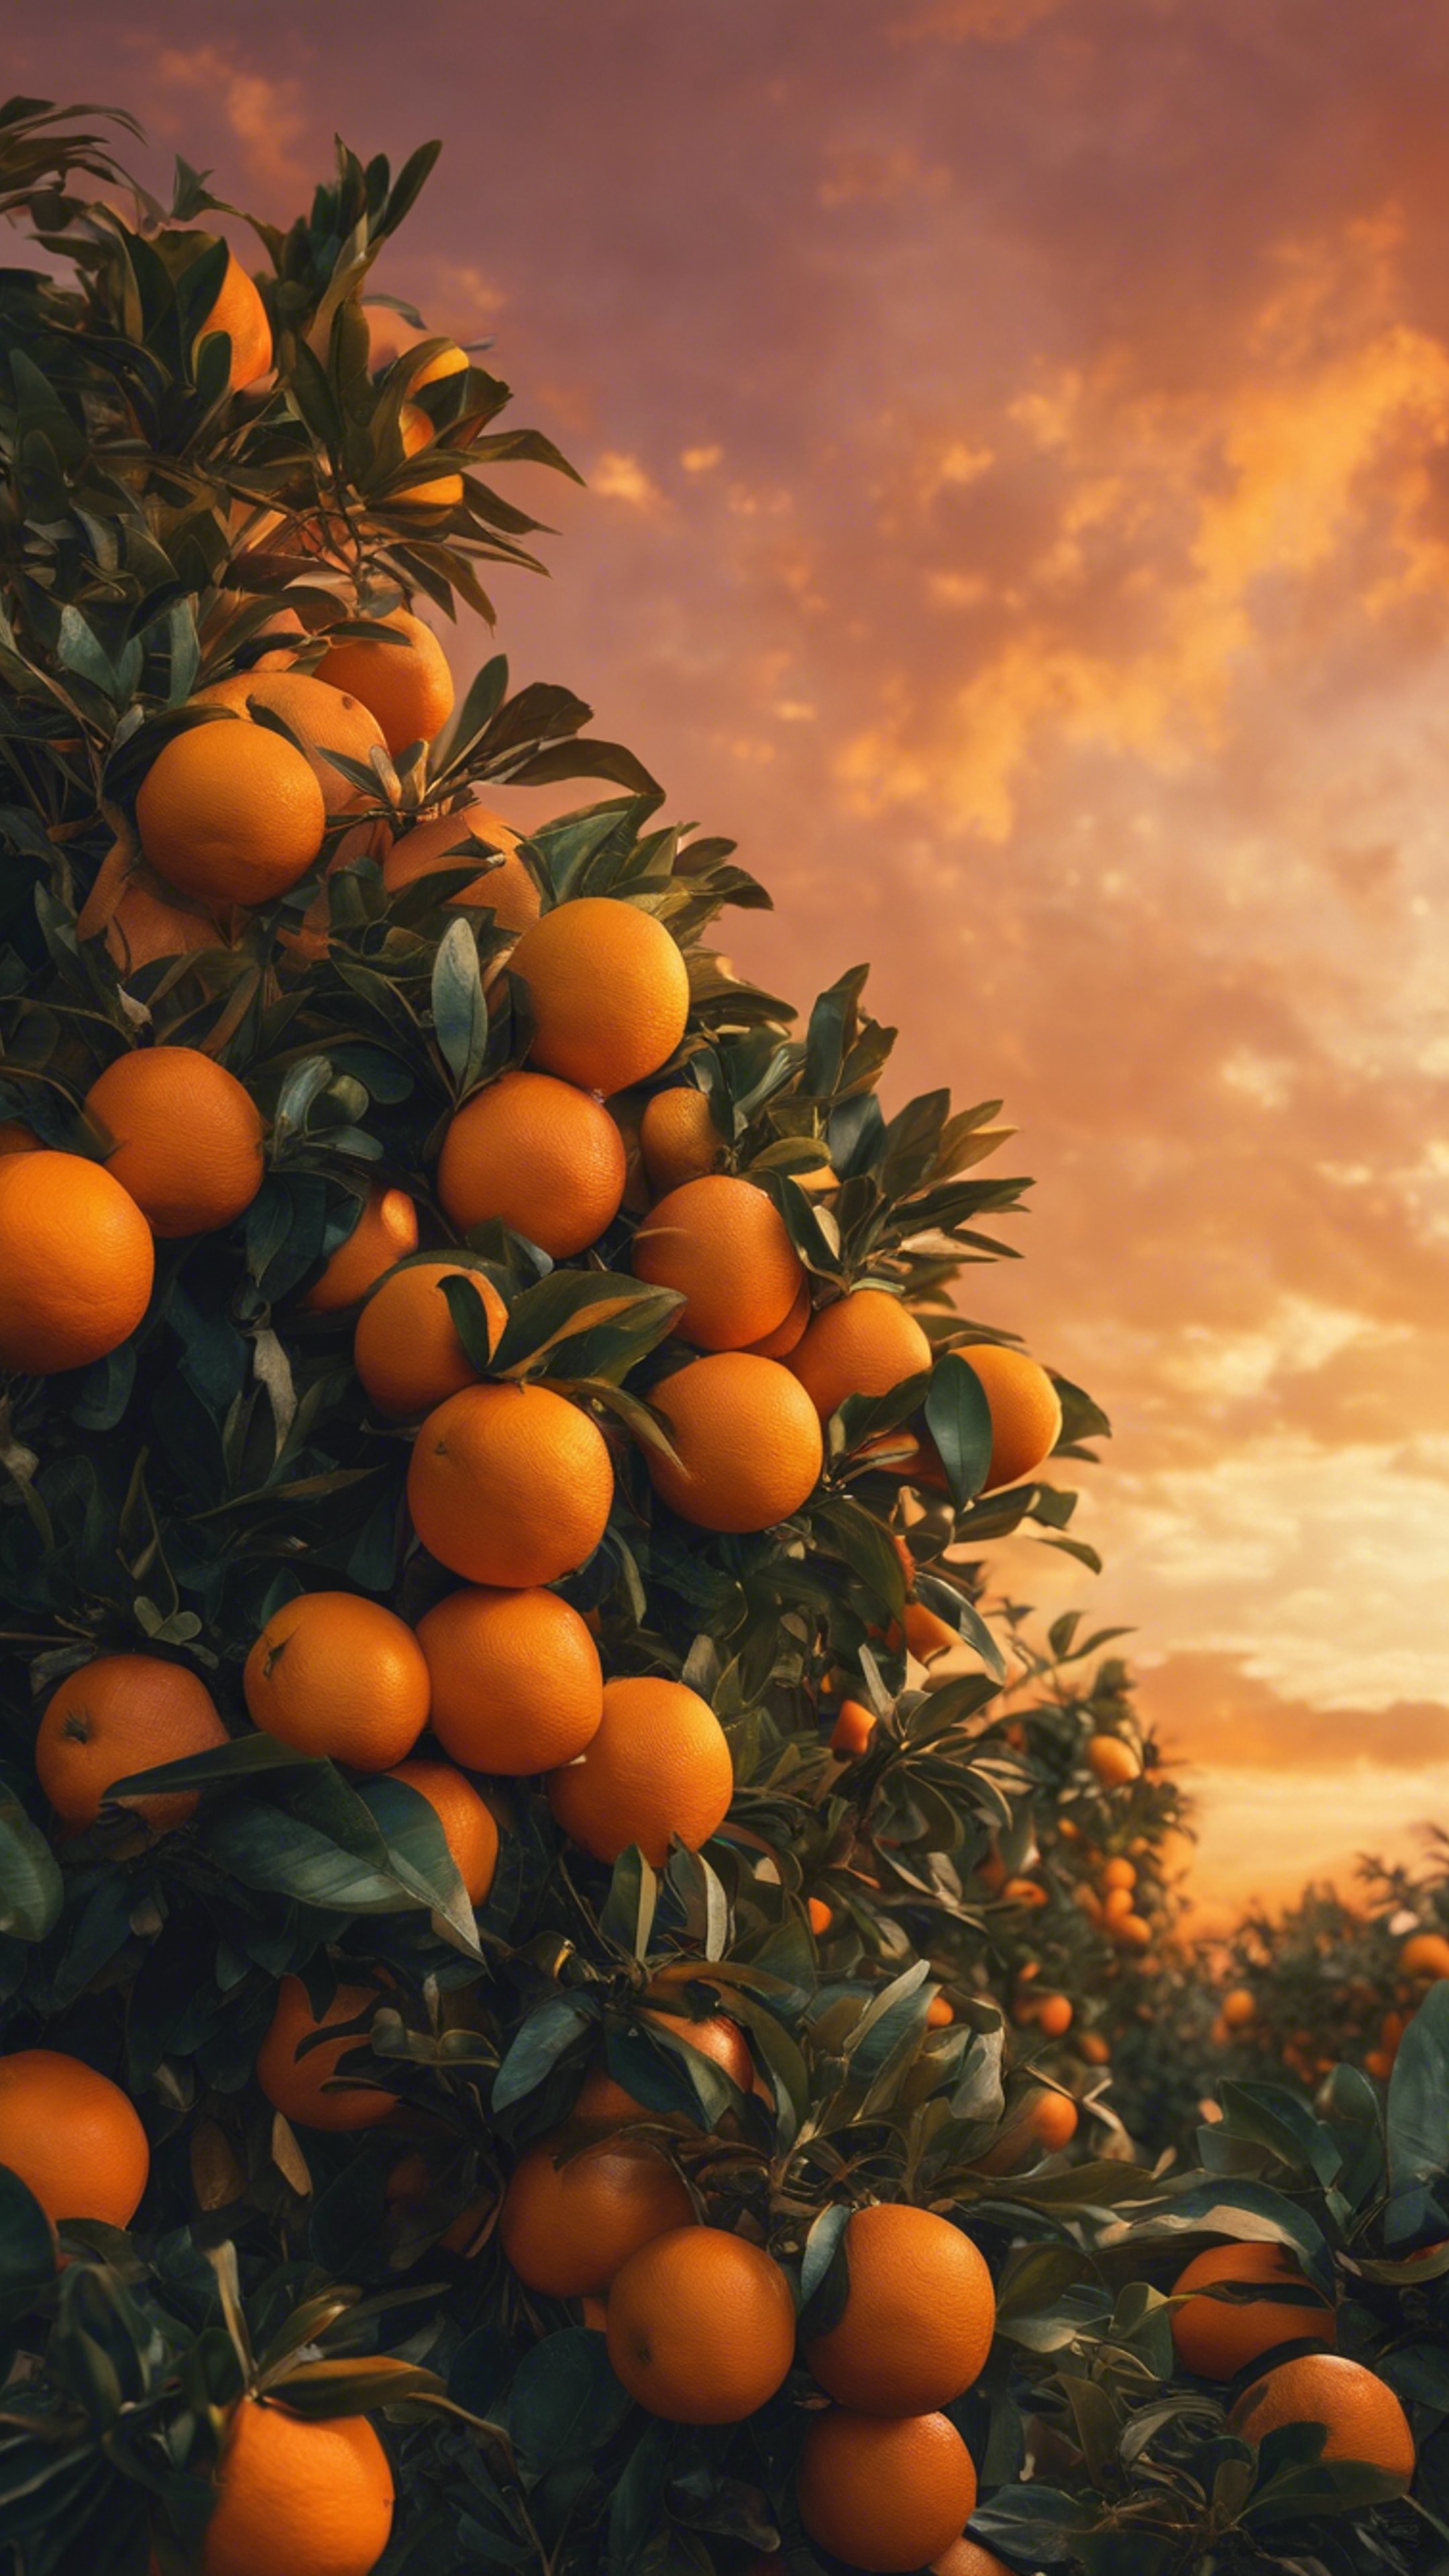 A grove of ripe, juicy oranges glowing under a brilliant sunset, coloring the sky in brilliant hues of orange and yellow.壁紙[fd9850145b2647cf8e06]